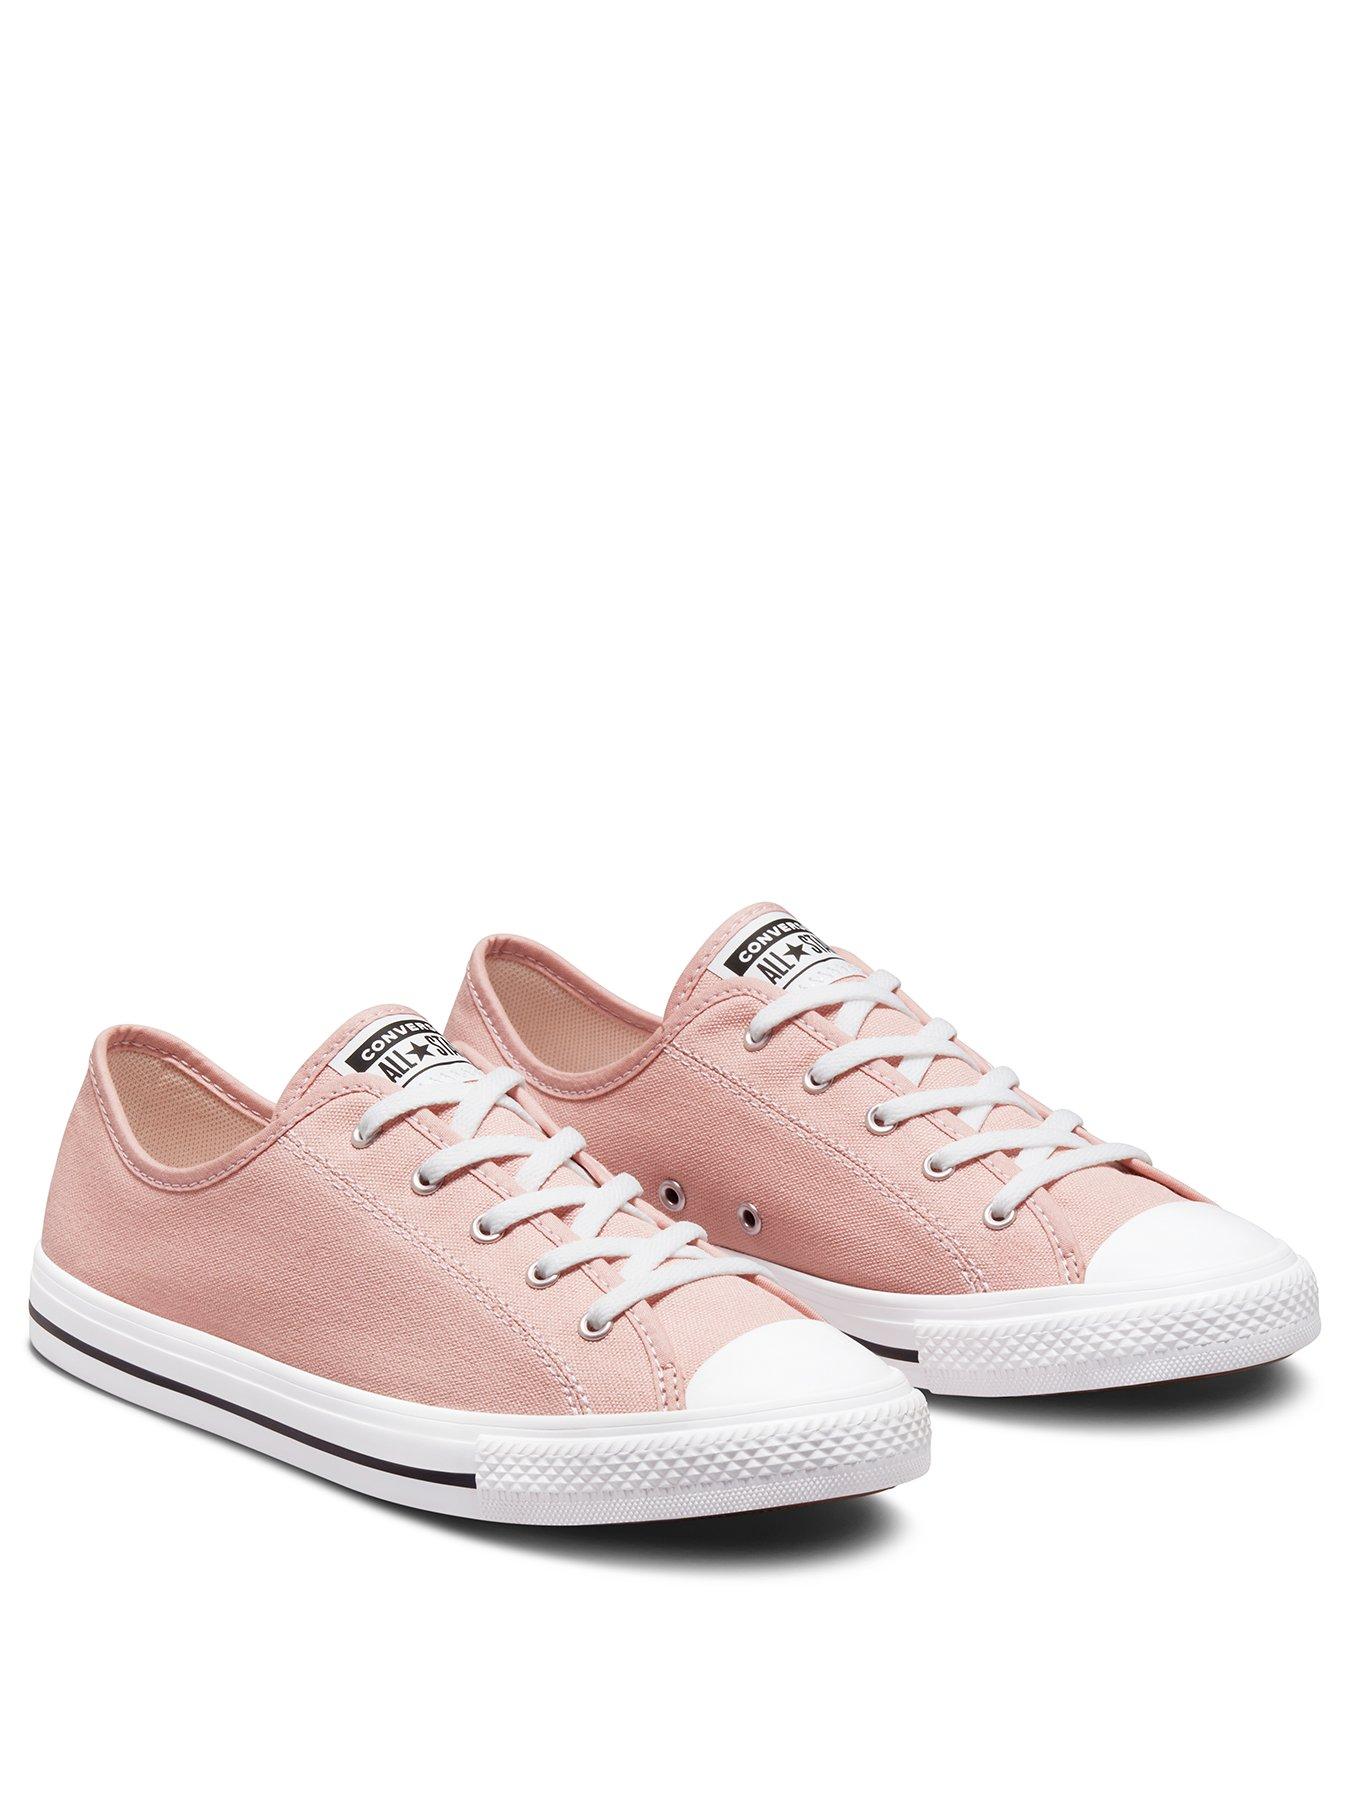 Trainers Chuck Taylor All Star Dainty Canvas Plimsolls - Pink